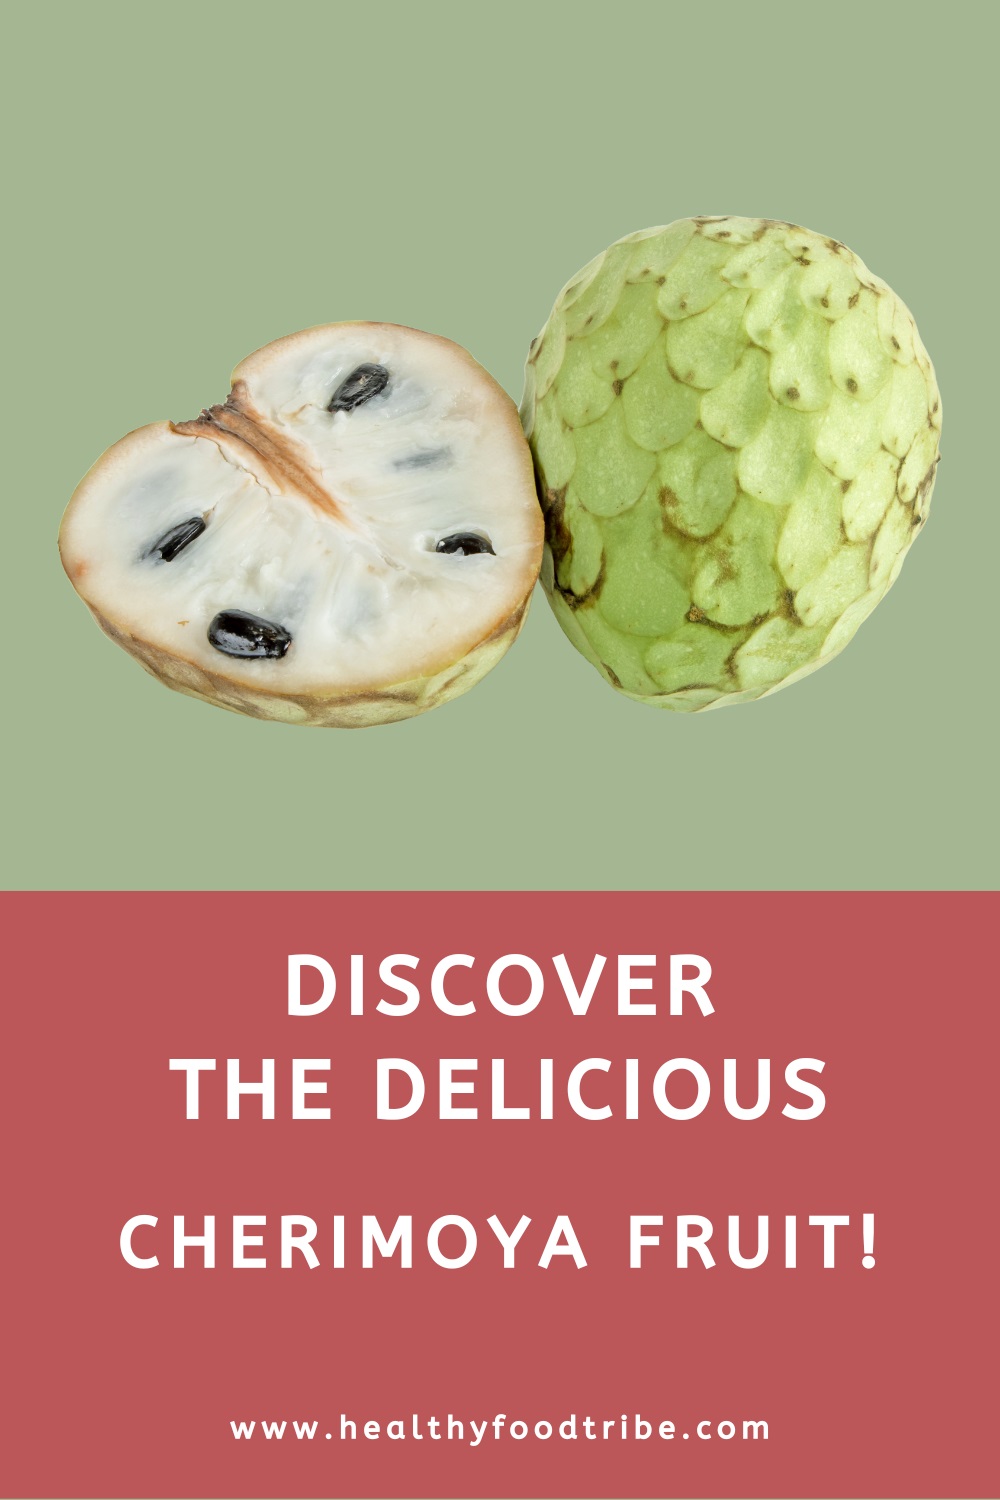 Discover the delicious cherimoya fruit